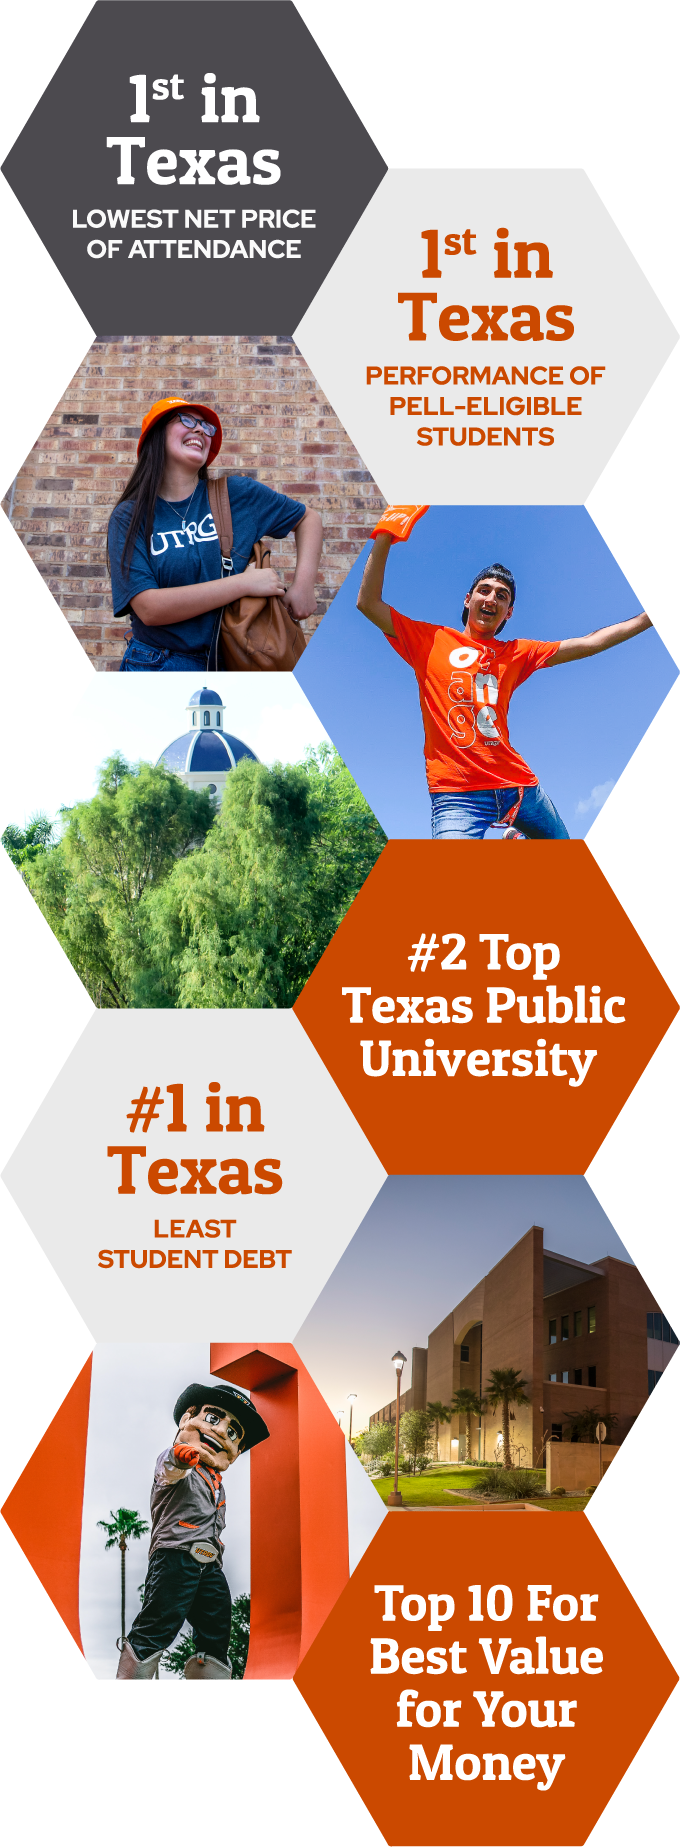 1st in texas lowest net price of attendance | 1st in texas performance of pell-eligible students | #2 top texas public university | #1 in texas least student debt | top 10 for best value for your money